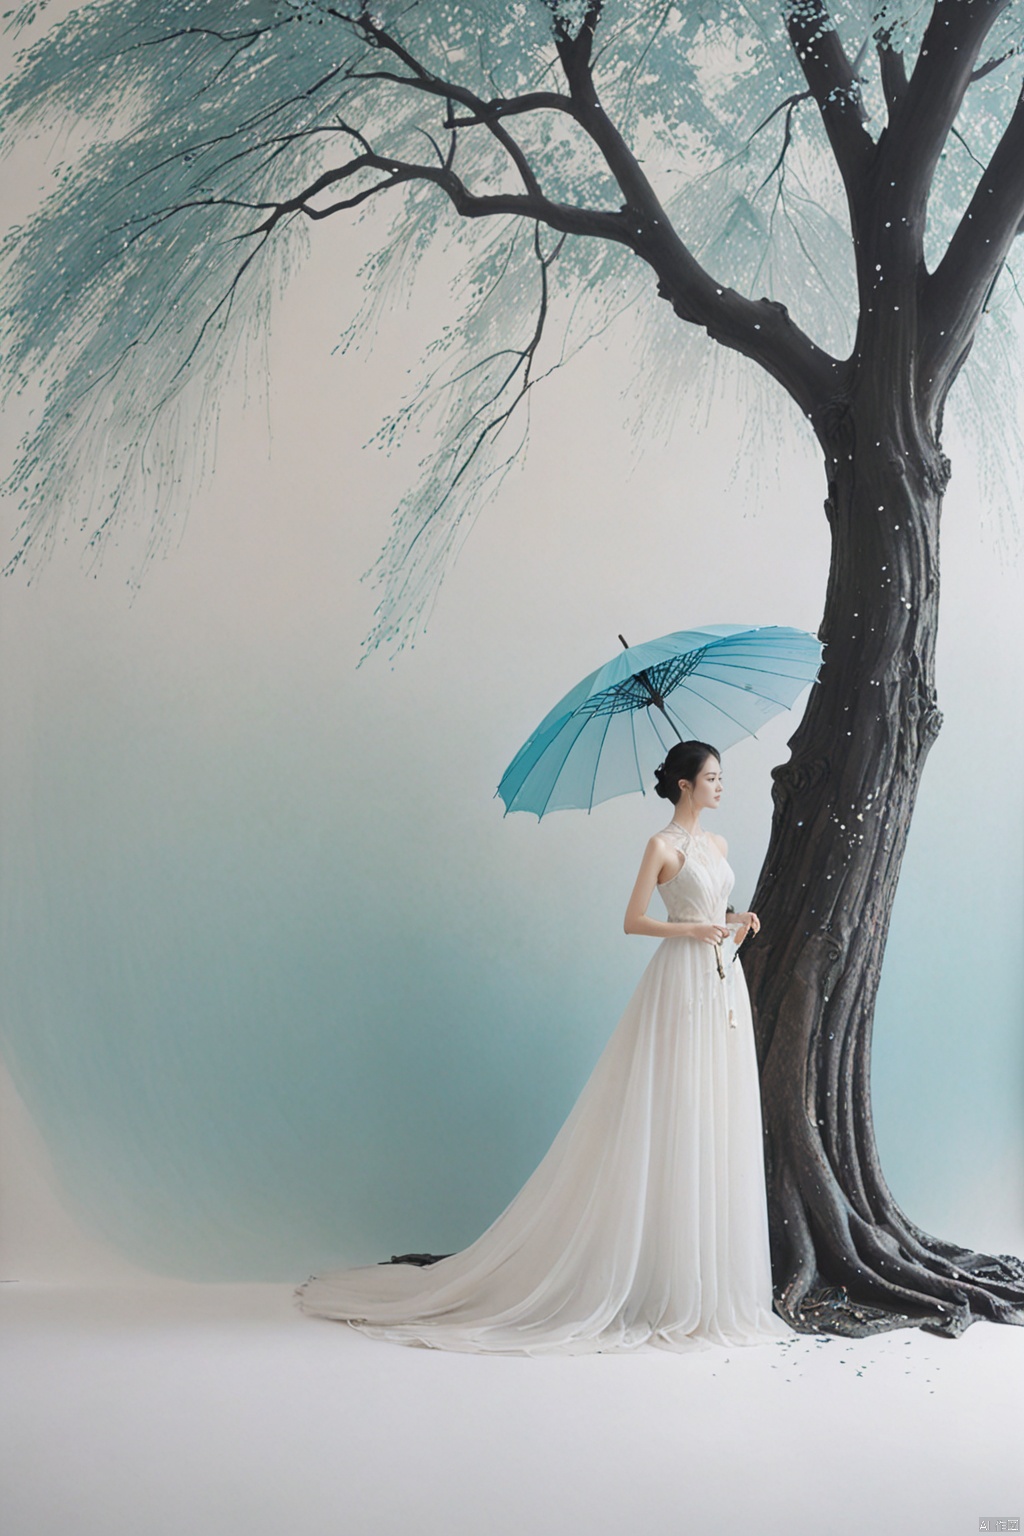  
/I Foreground a tree, Chinese beauty holding an umbrella, cyan and white color matching, ink painting minimalist style, large white space, tulle translucent material, soft gradient, perspective aesthetics